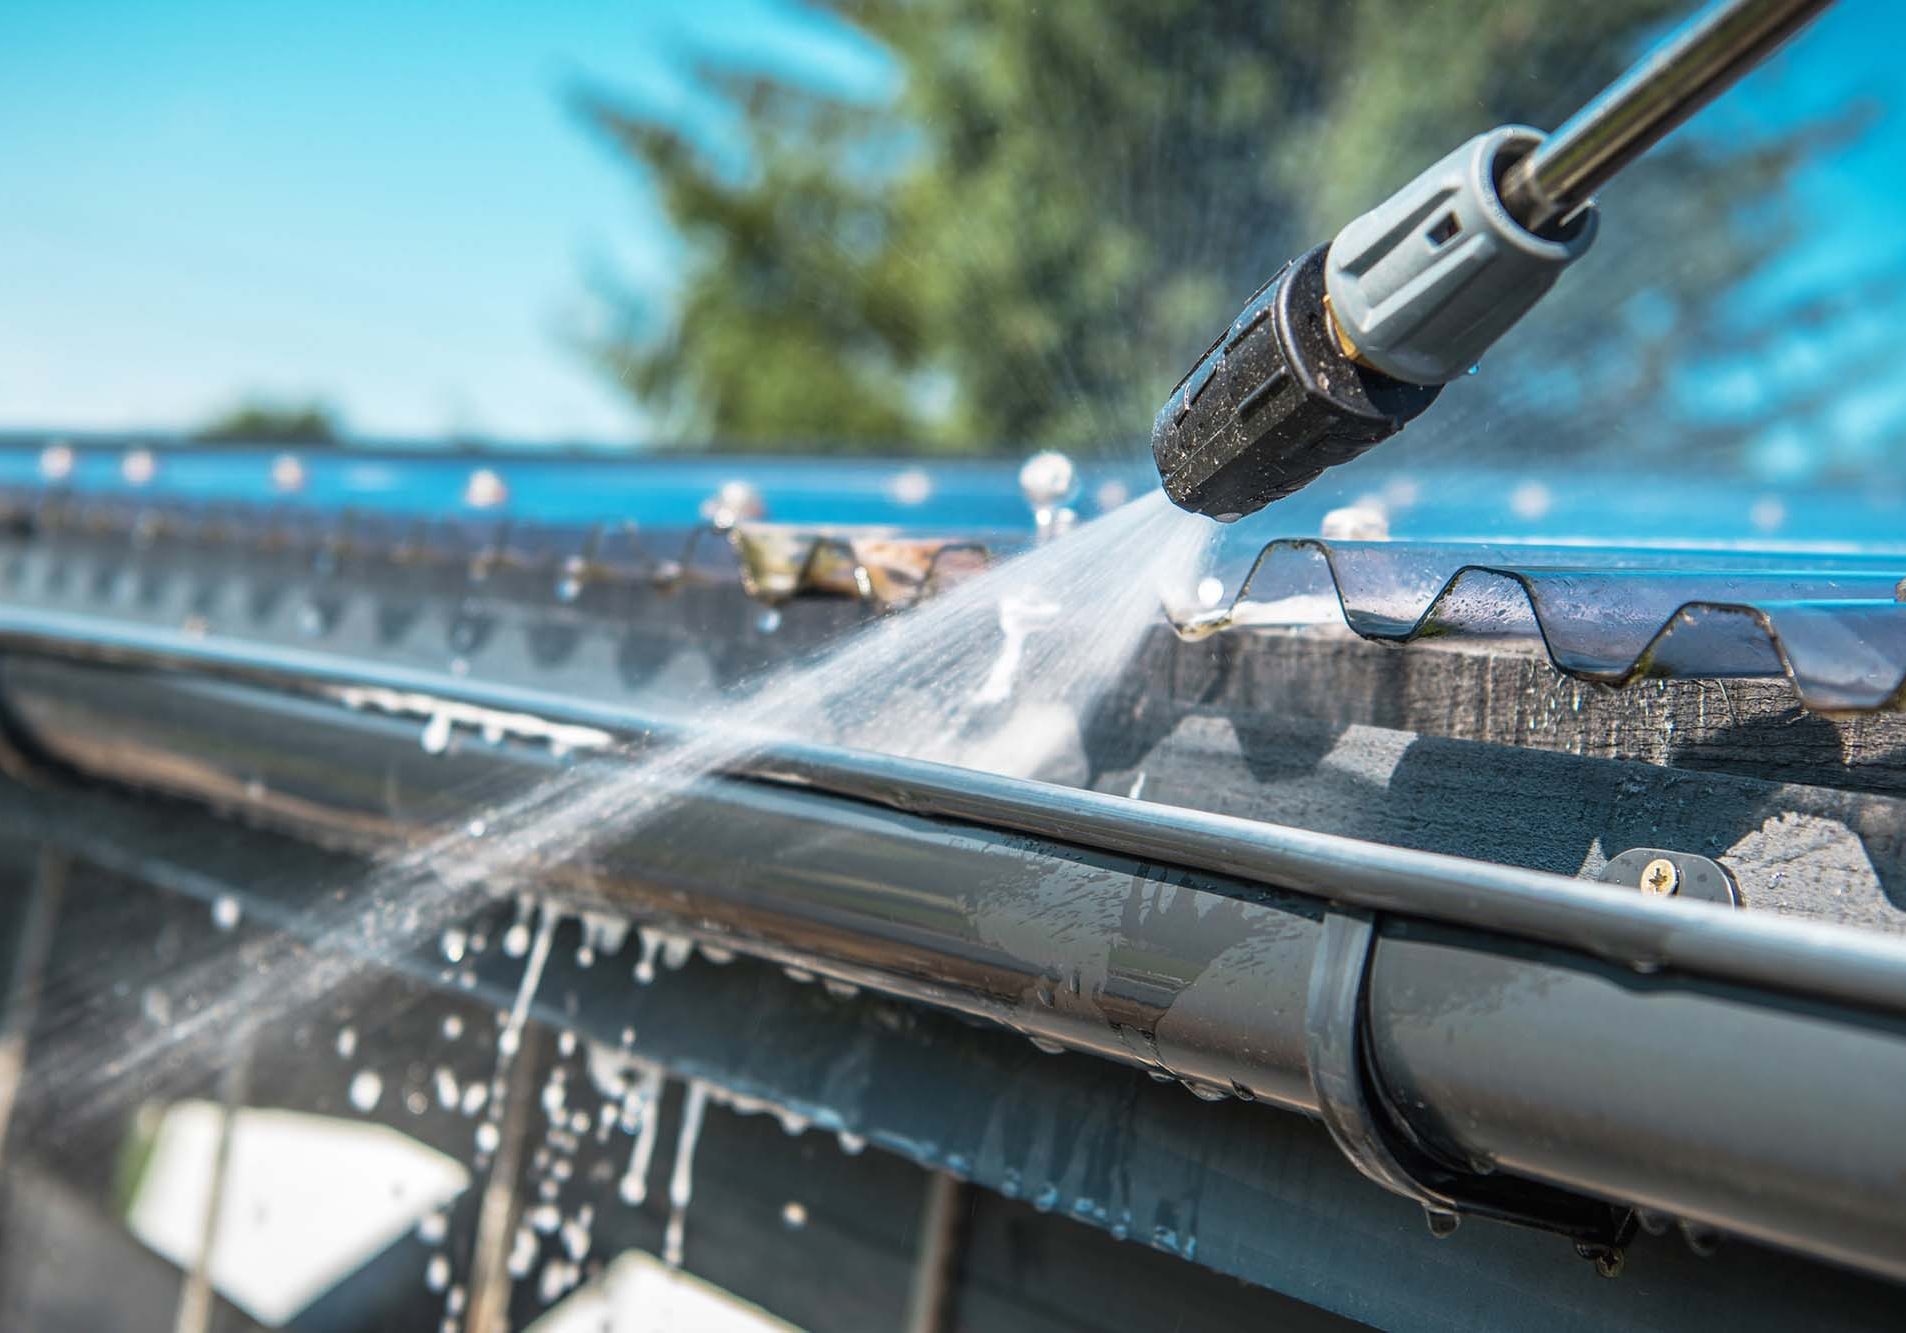 Cleaning gutters with a jet washer